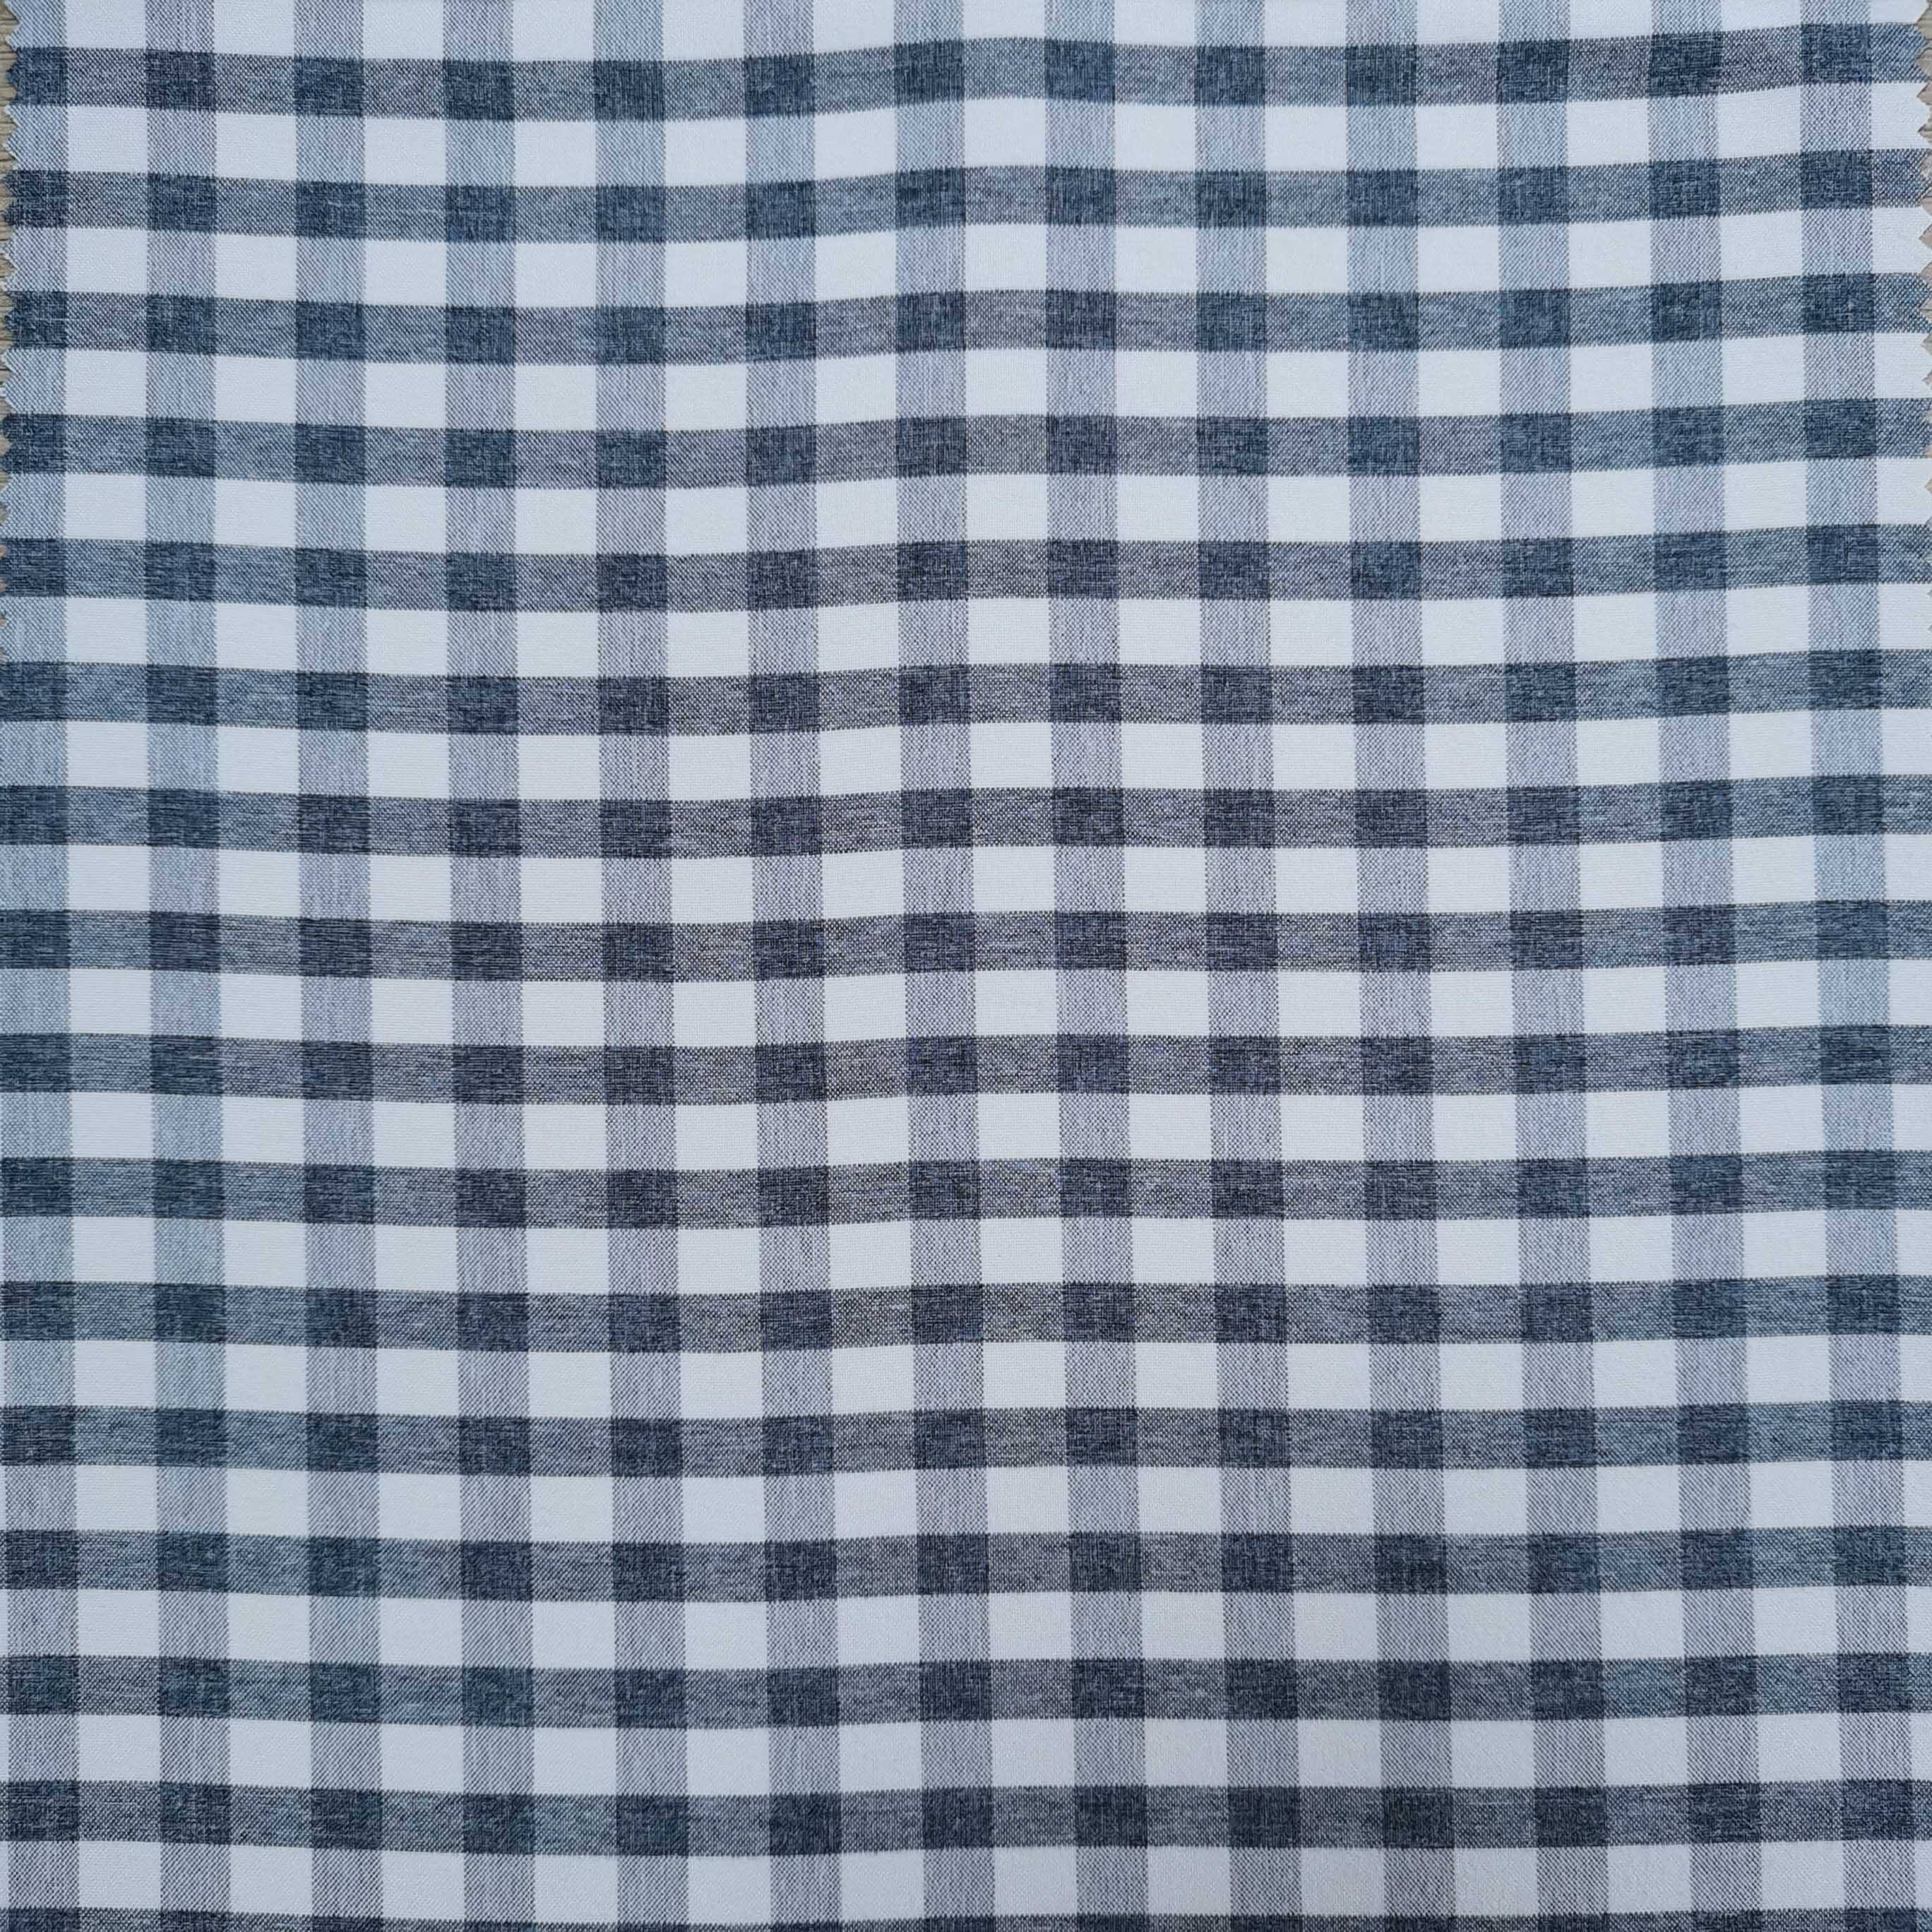 Hot selling 100% polyester grid fabric peach finished checked fabric